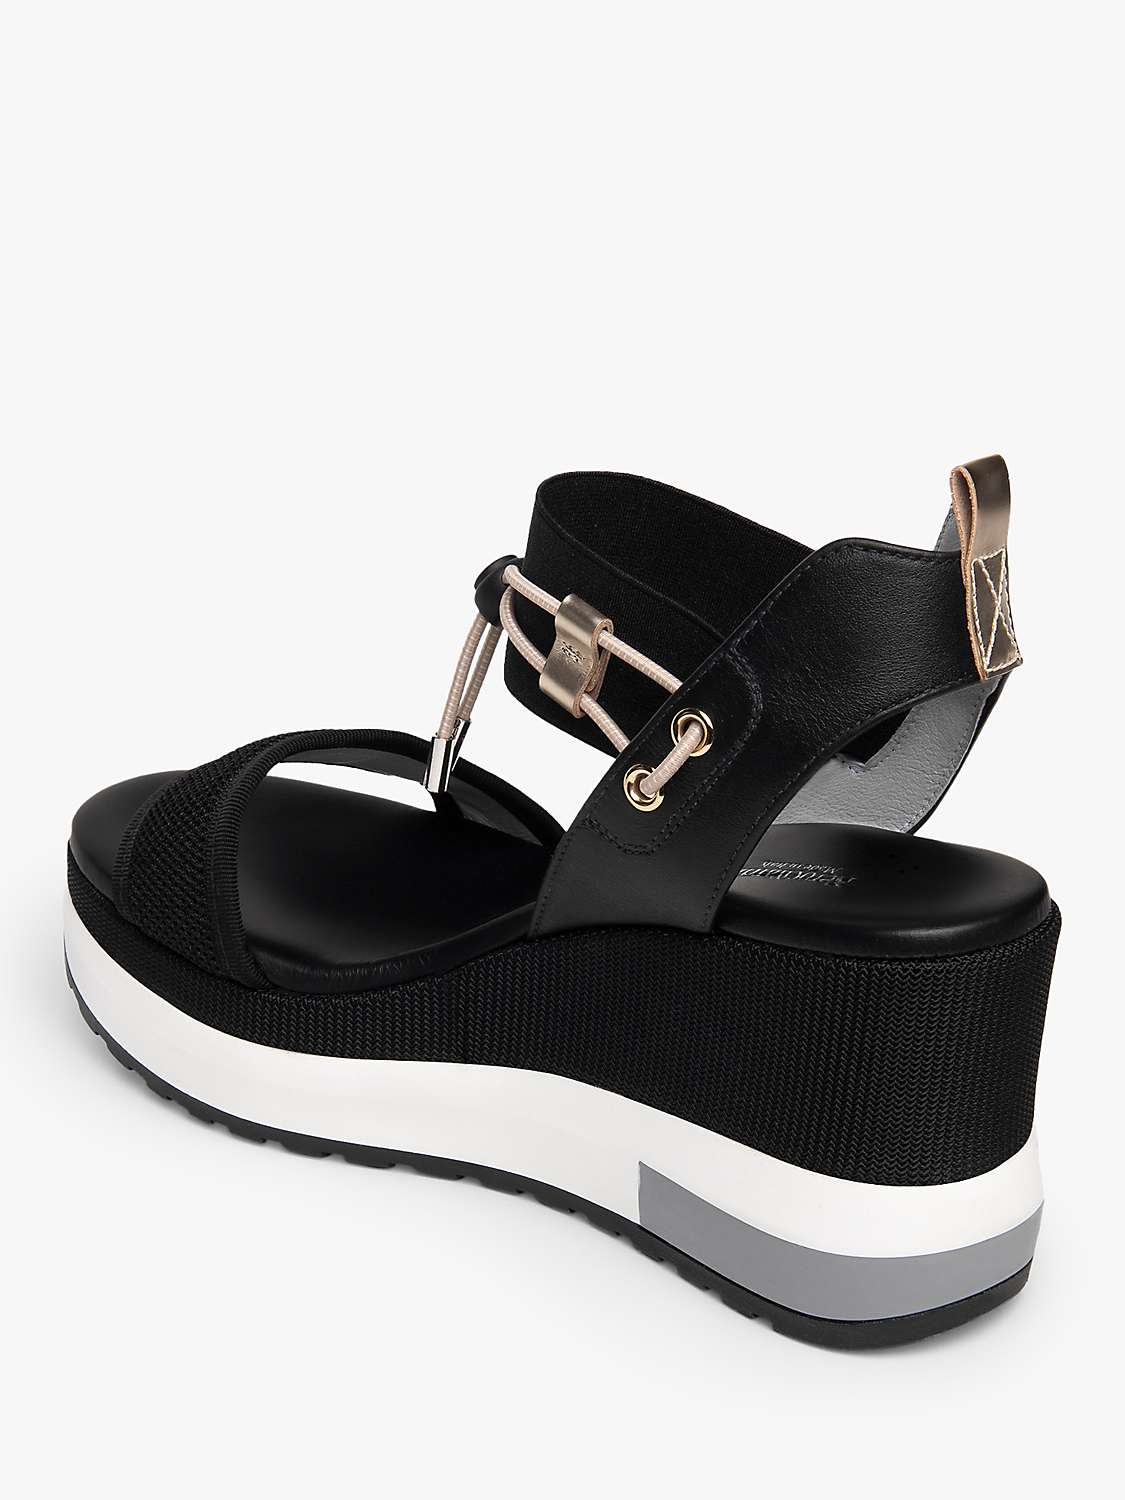 Buy NeroGiardini Leather Sports Wedge Sandals Online at johnlewis.com